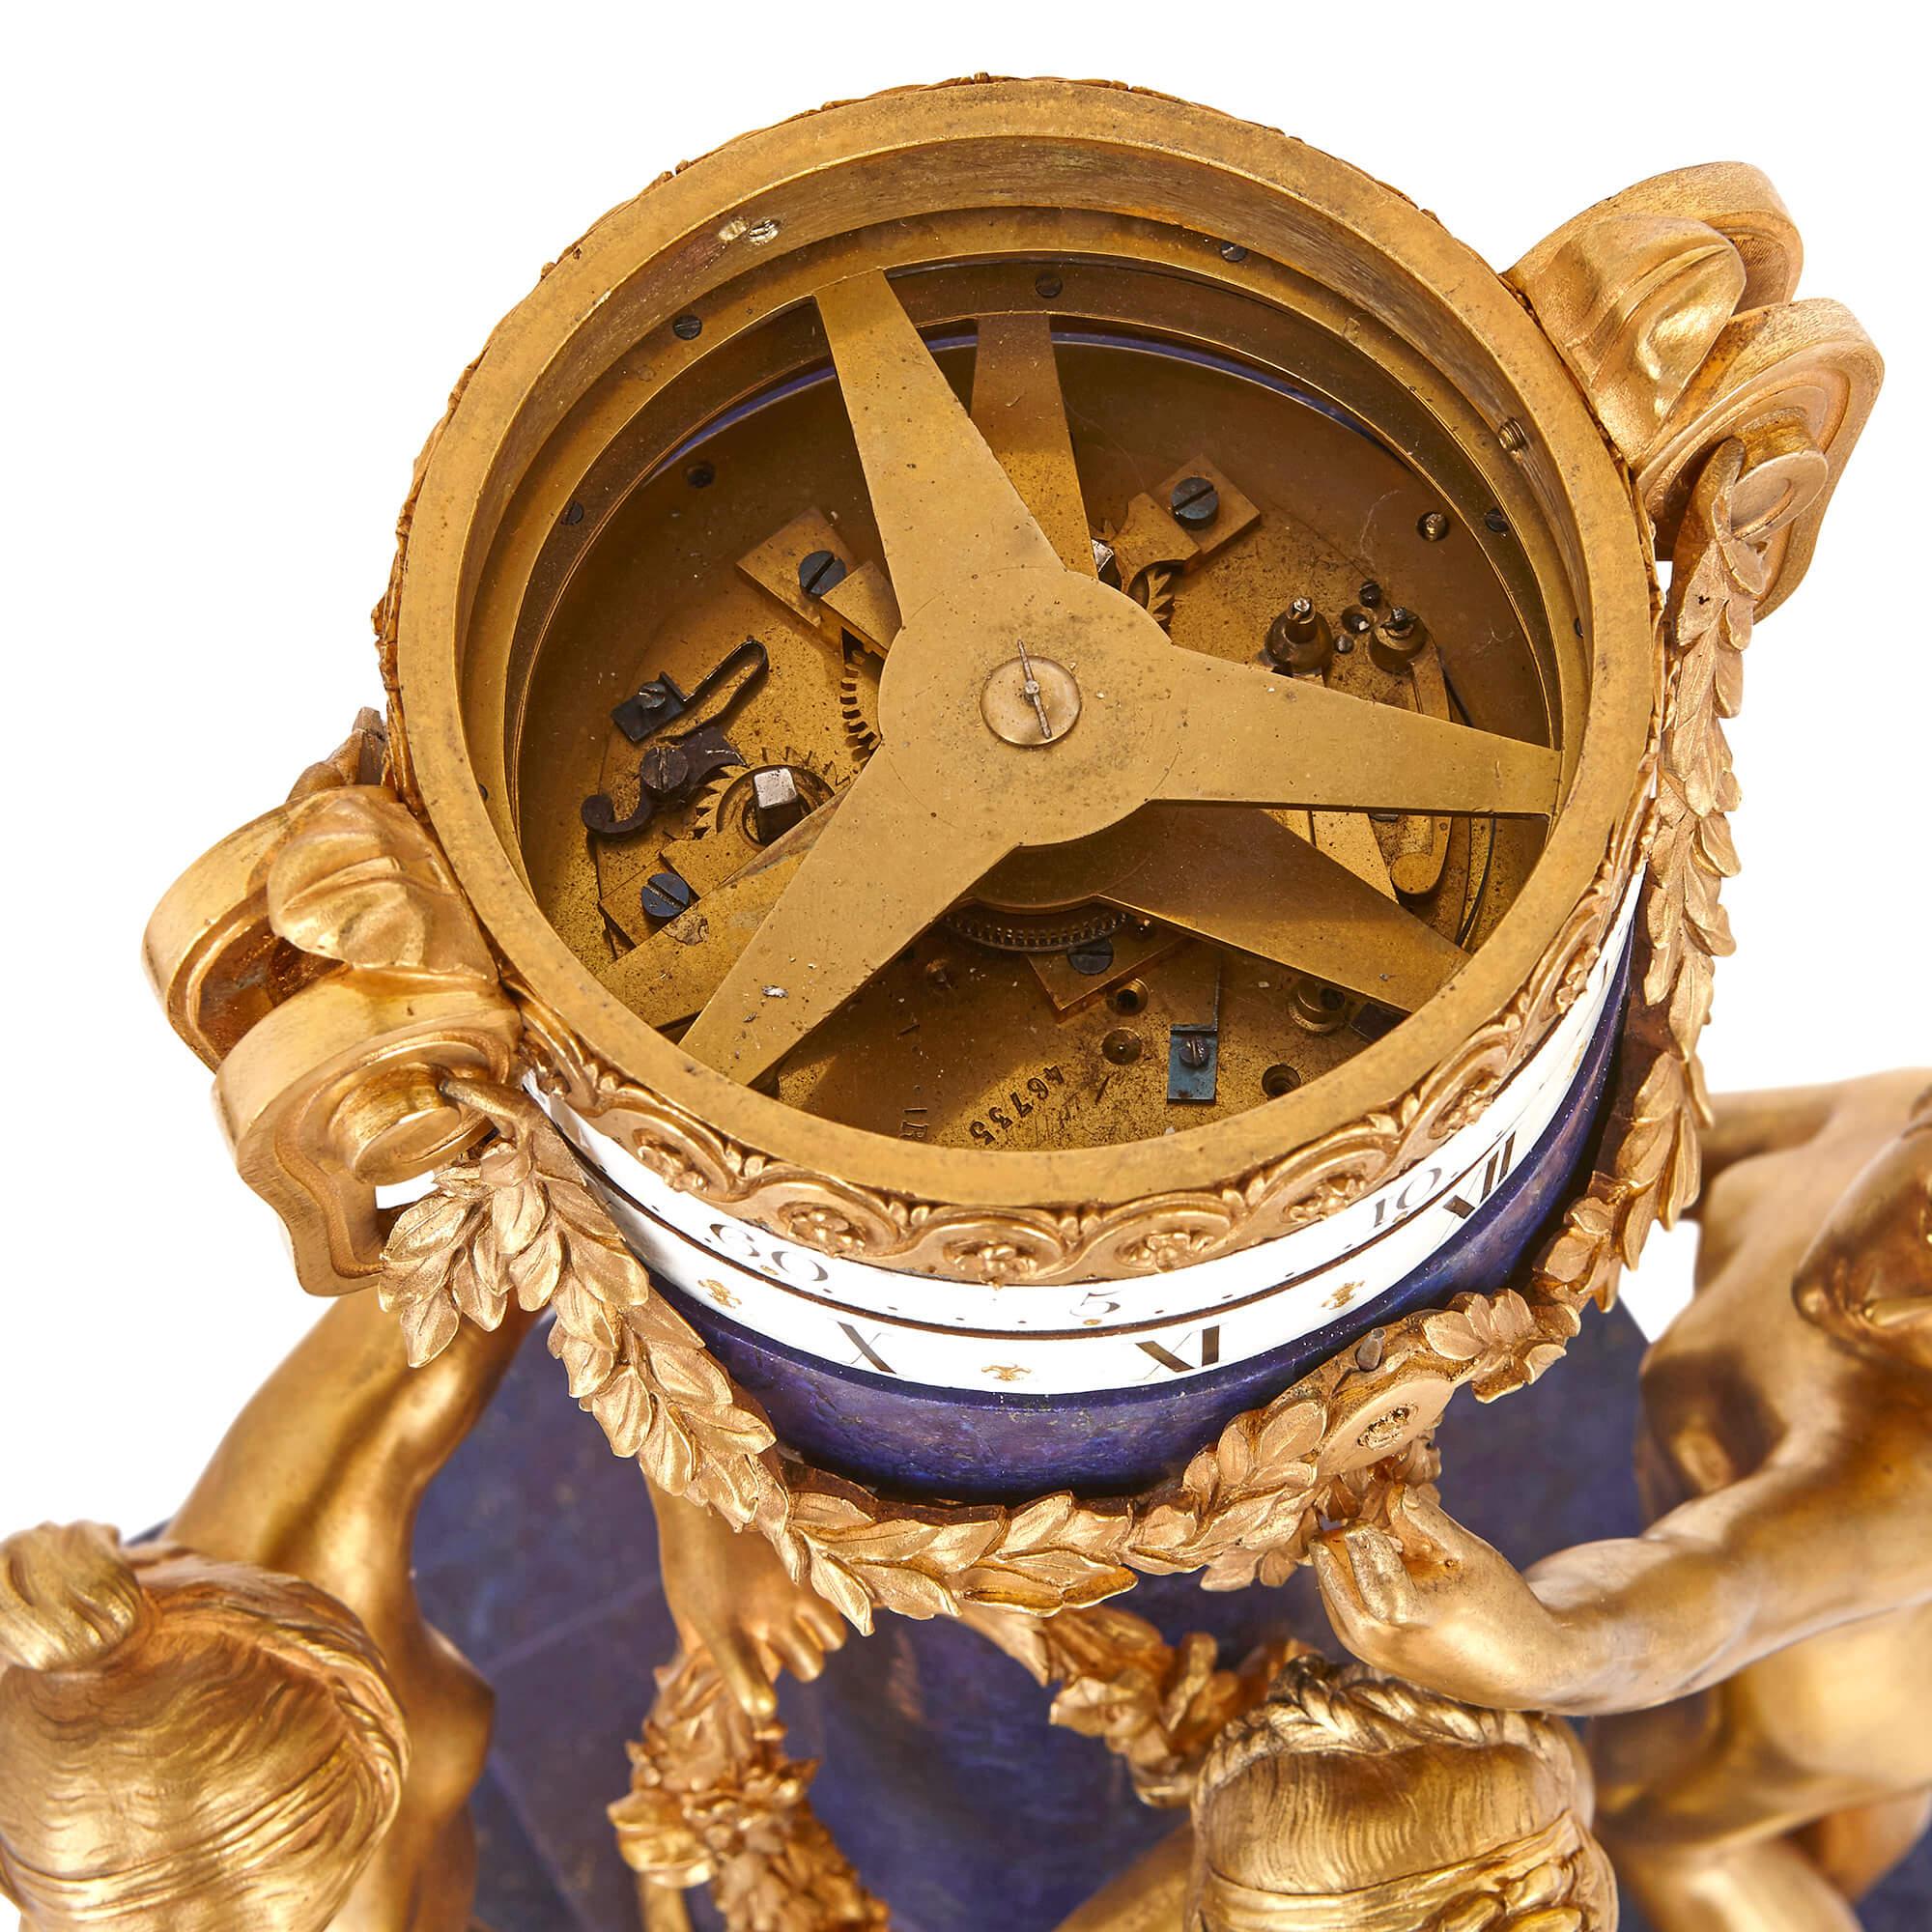 Antique French Gilt Bronze and Lapis Lazuli Mantel Clock after Falconet For Sale 2